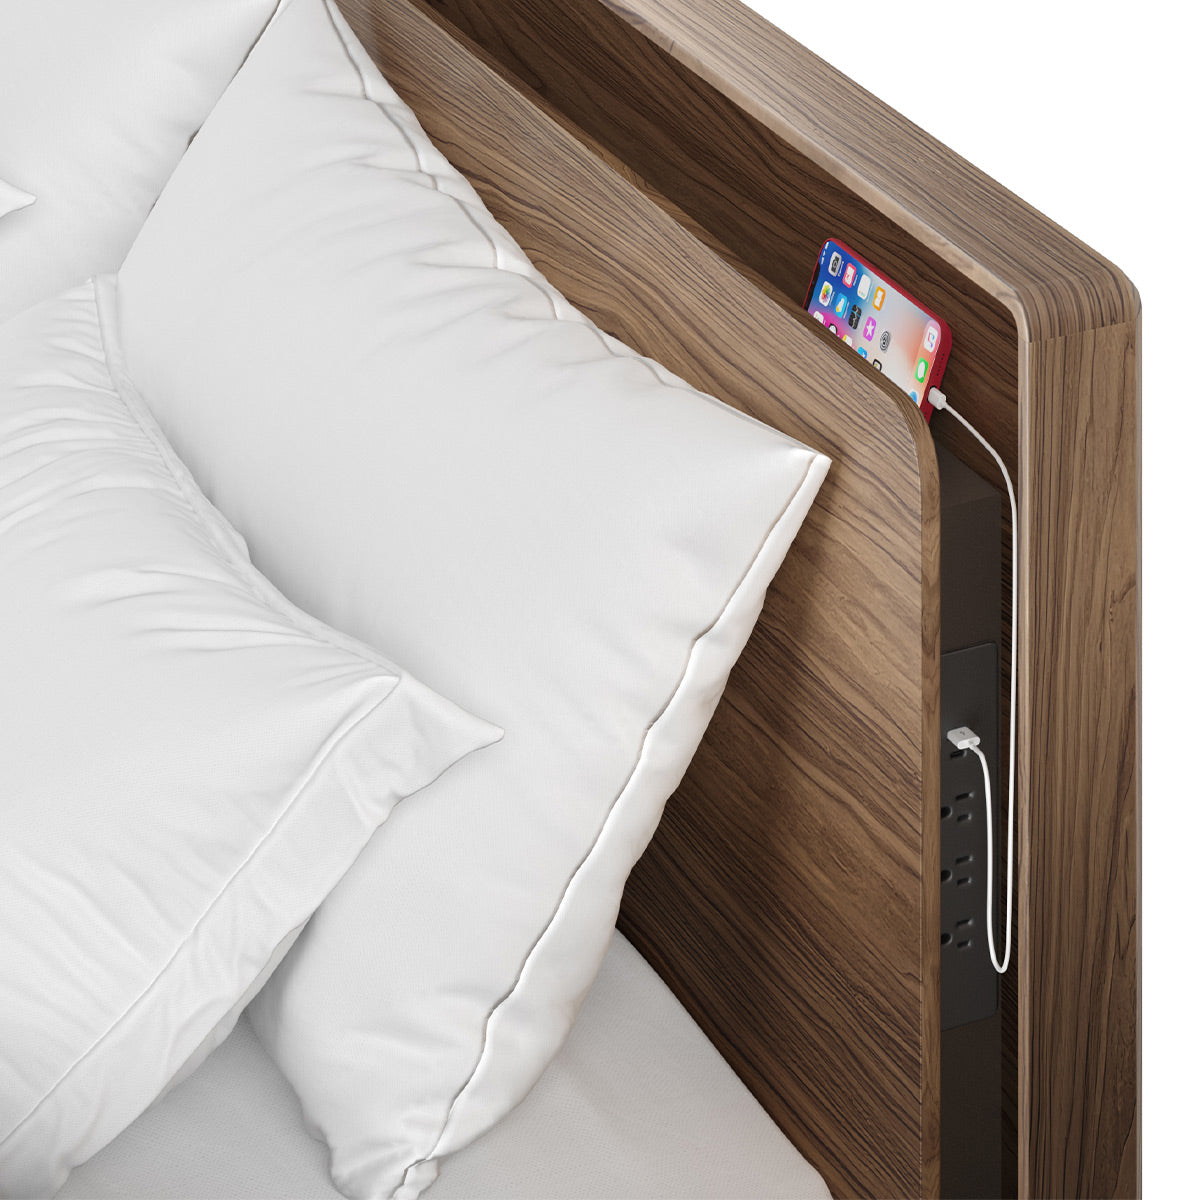 BDI Up-LINQ 9117 Queen Size Bed with Dual-Level Headboard, Dimmable Accent Lighting, and Integrated Power Stations (Natural Walnut)